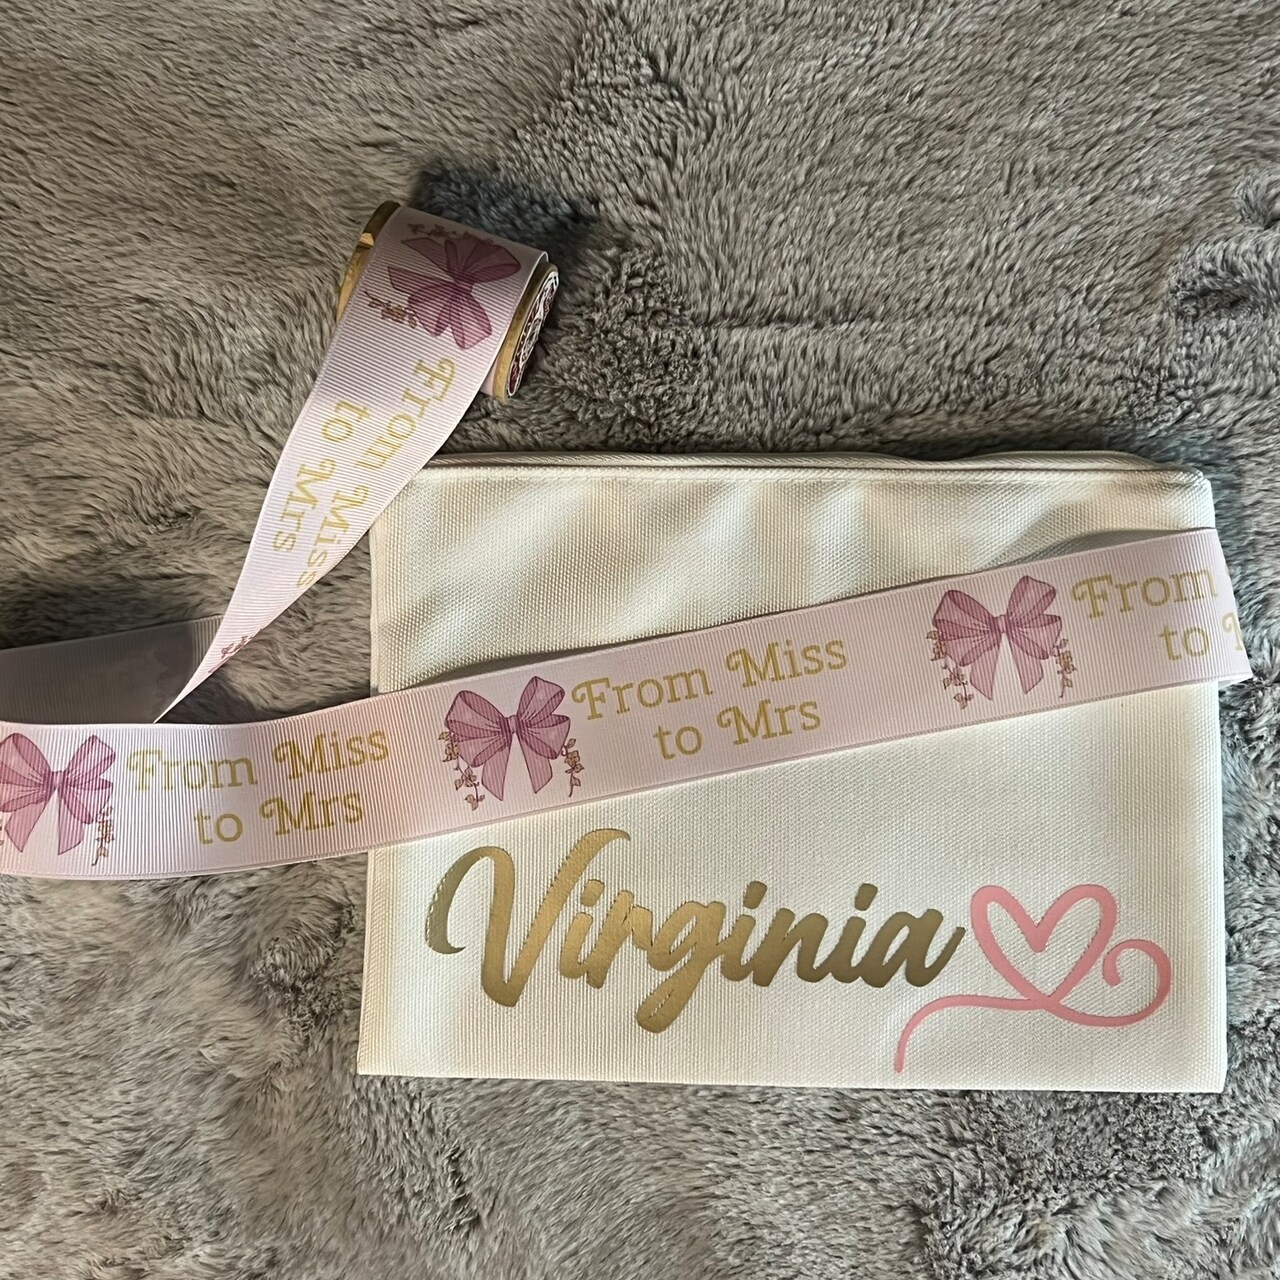 Making your Own Custom Ribbon with Kesley Anderson